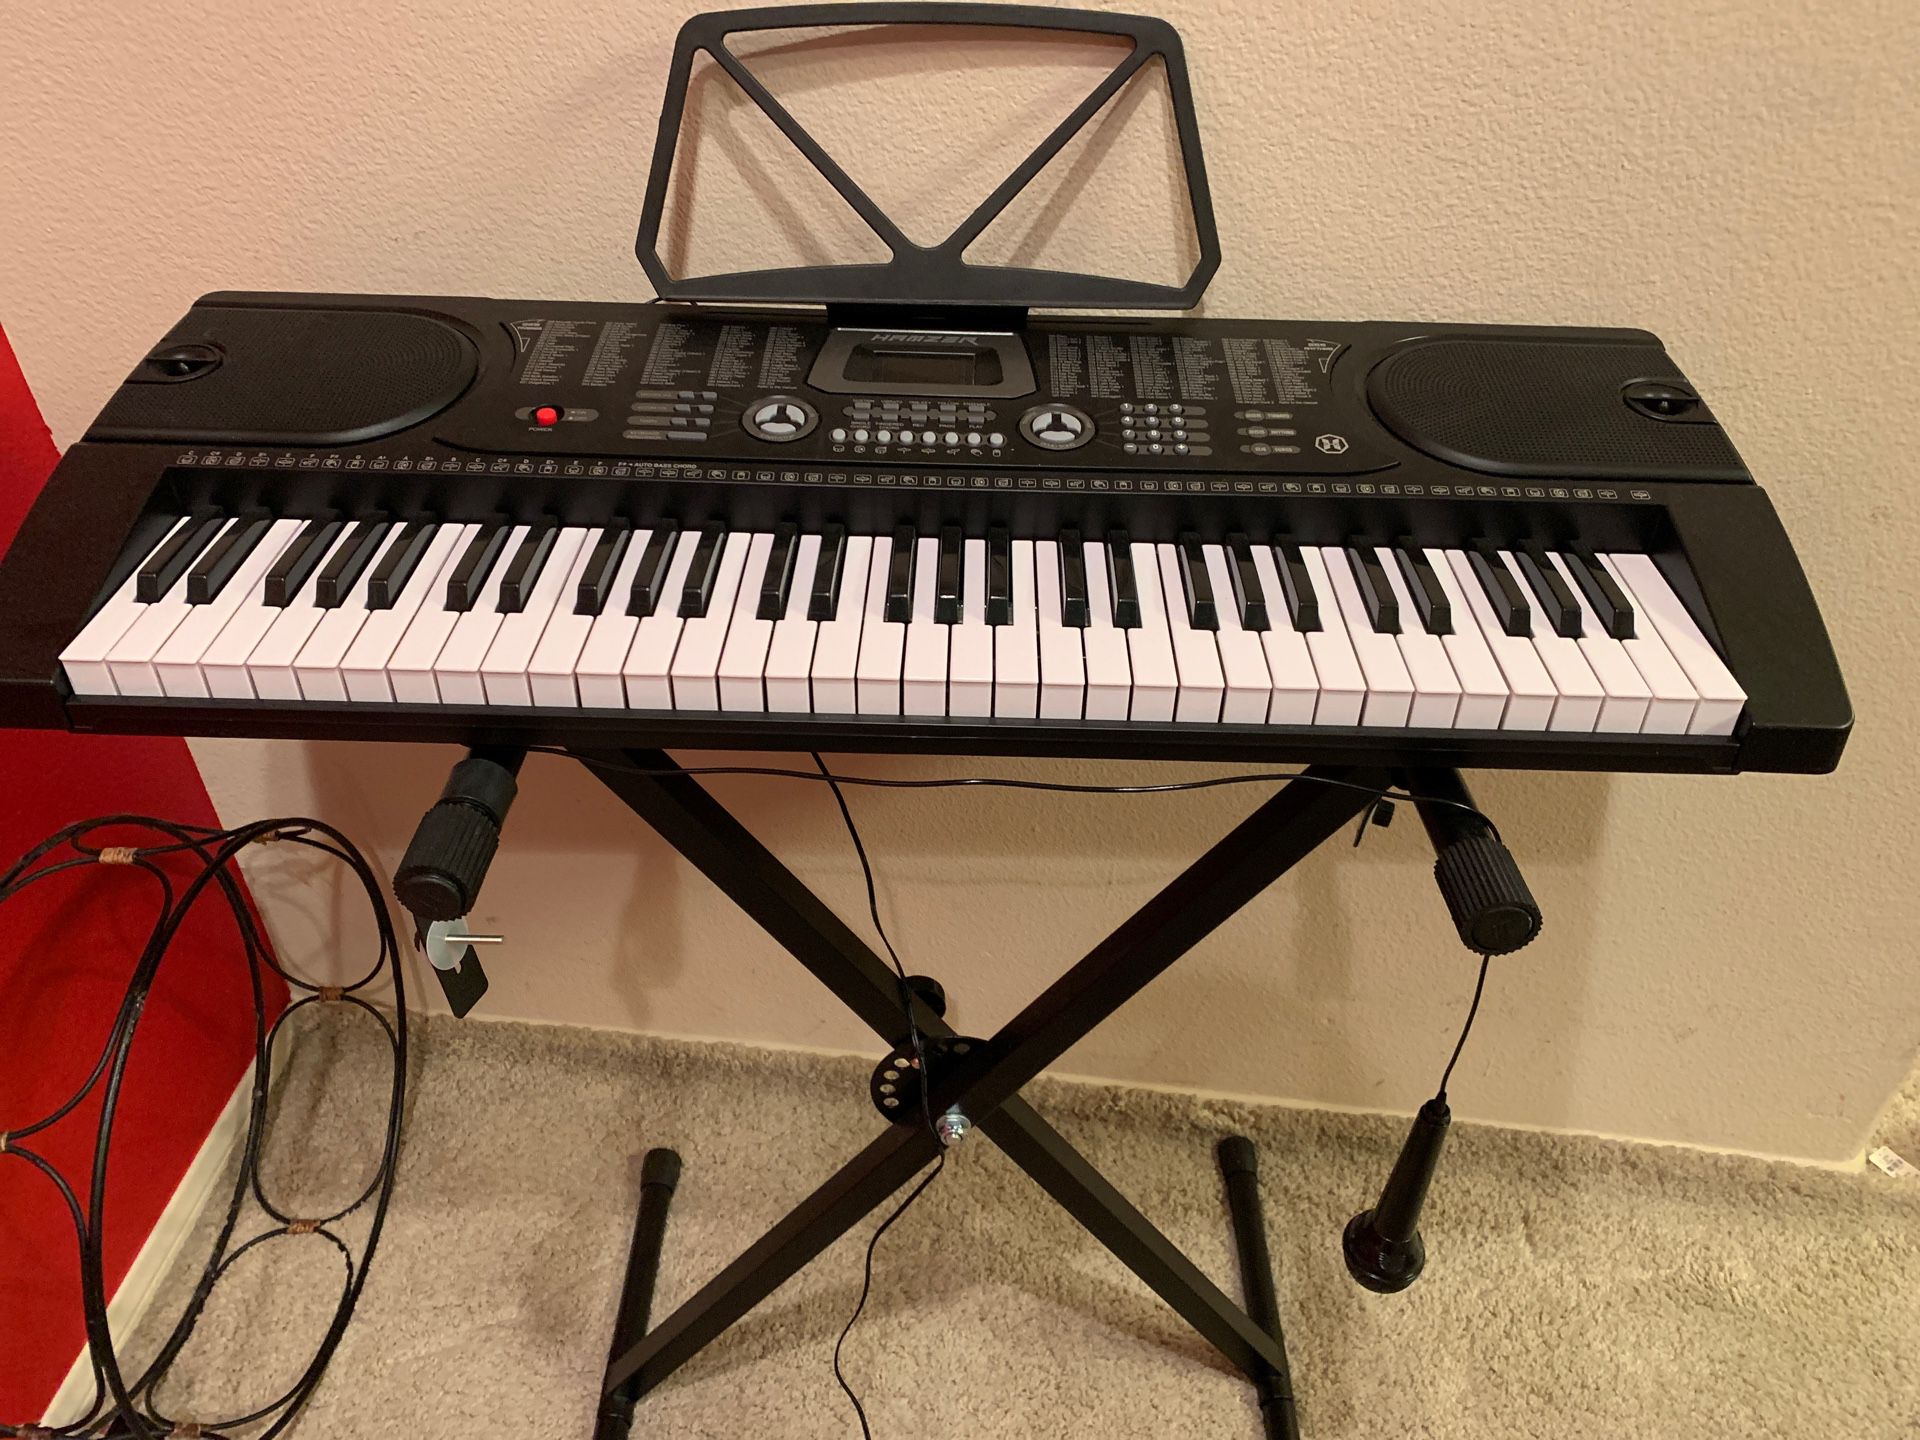 Hamzer 61-key Electronic Music keyboard with stand & microphone